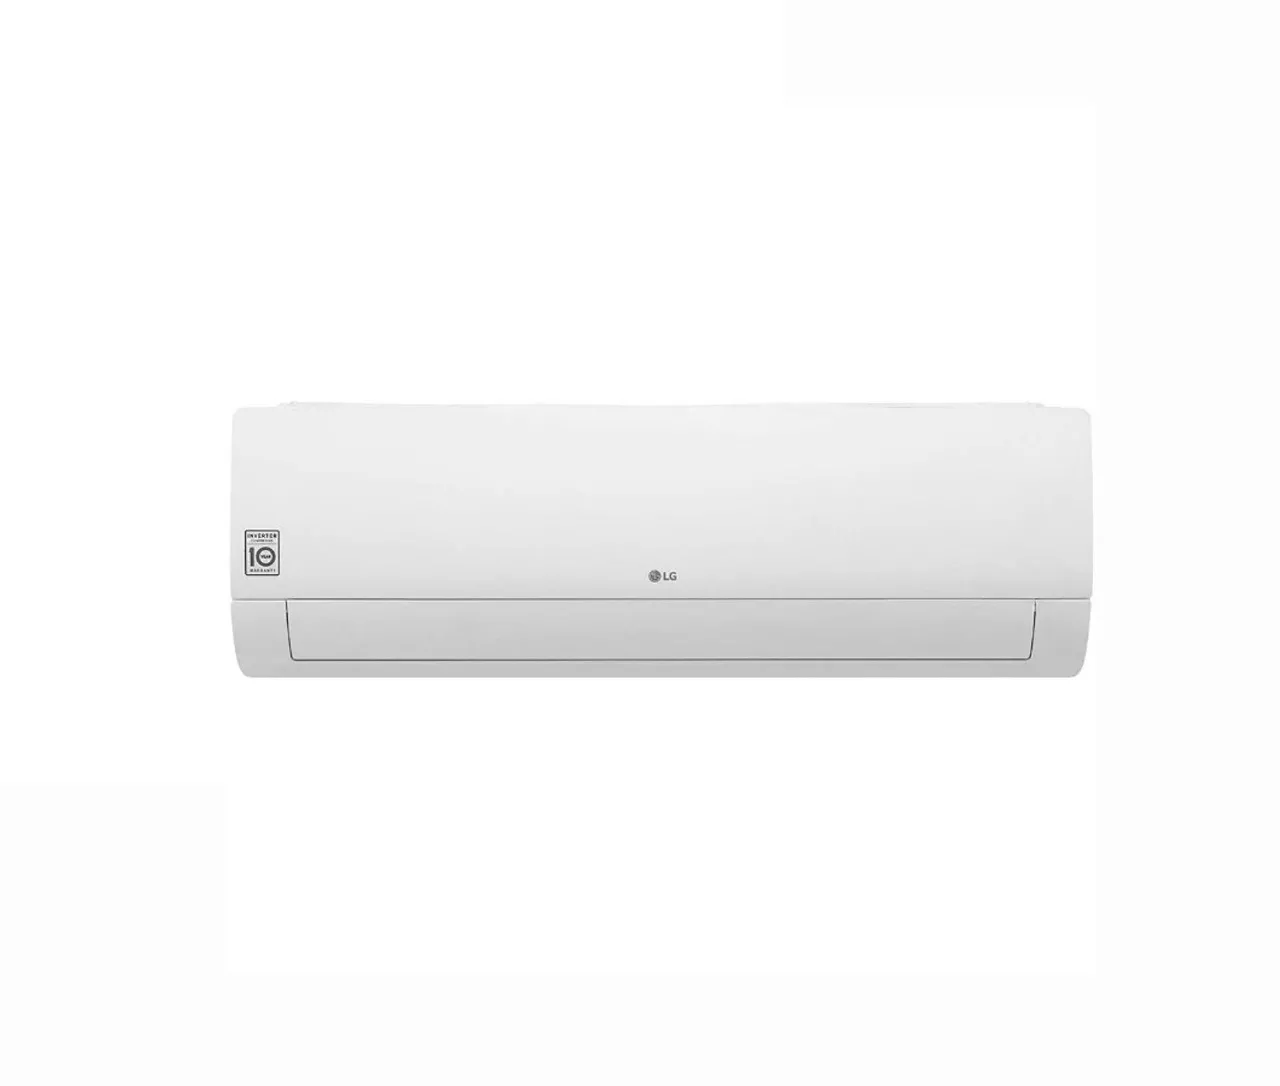 LG 1 Ton Split Air Conditioner Energy Saving Faster Cooling Rotary Compressor 12000 BTU Color White Model – S4NH12TZCAA – 1 Year Full Warranty